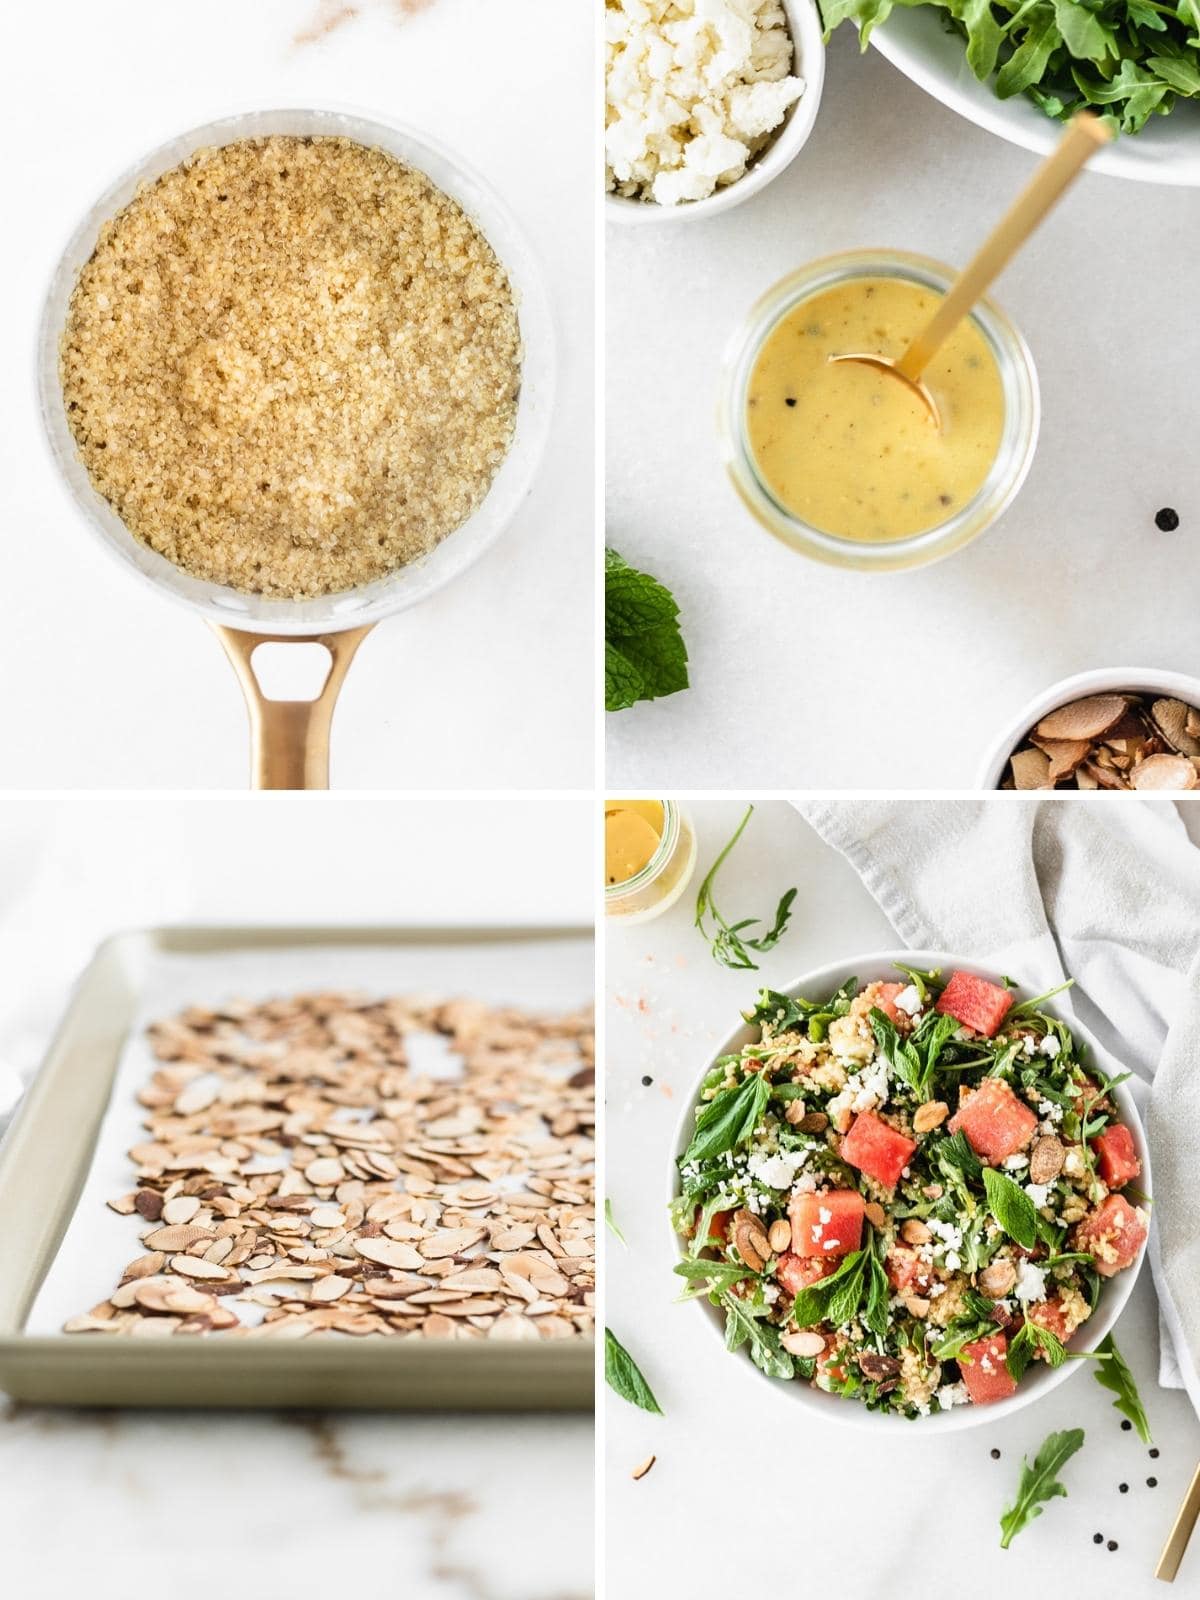 four image collage of cooked quinoa in a saucepan, champagne vinaigrette in a glass jar, toasted almonds on a baking sheet, and arugula salad with watermelon, quinoa and feta.. 